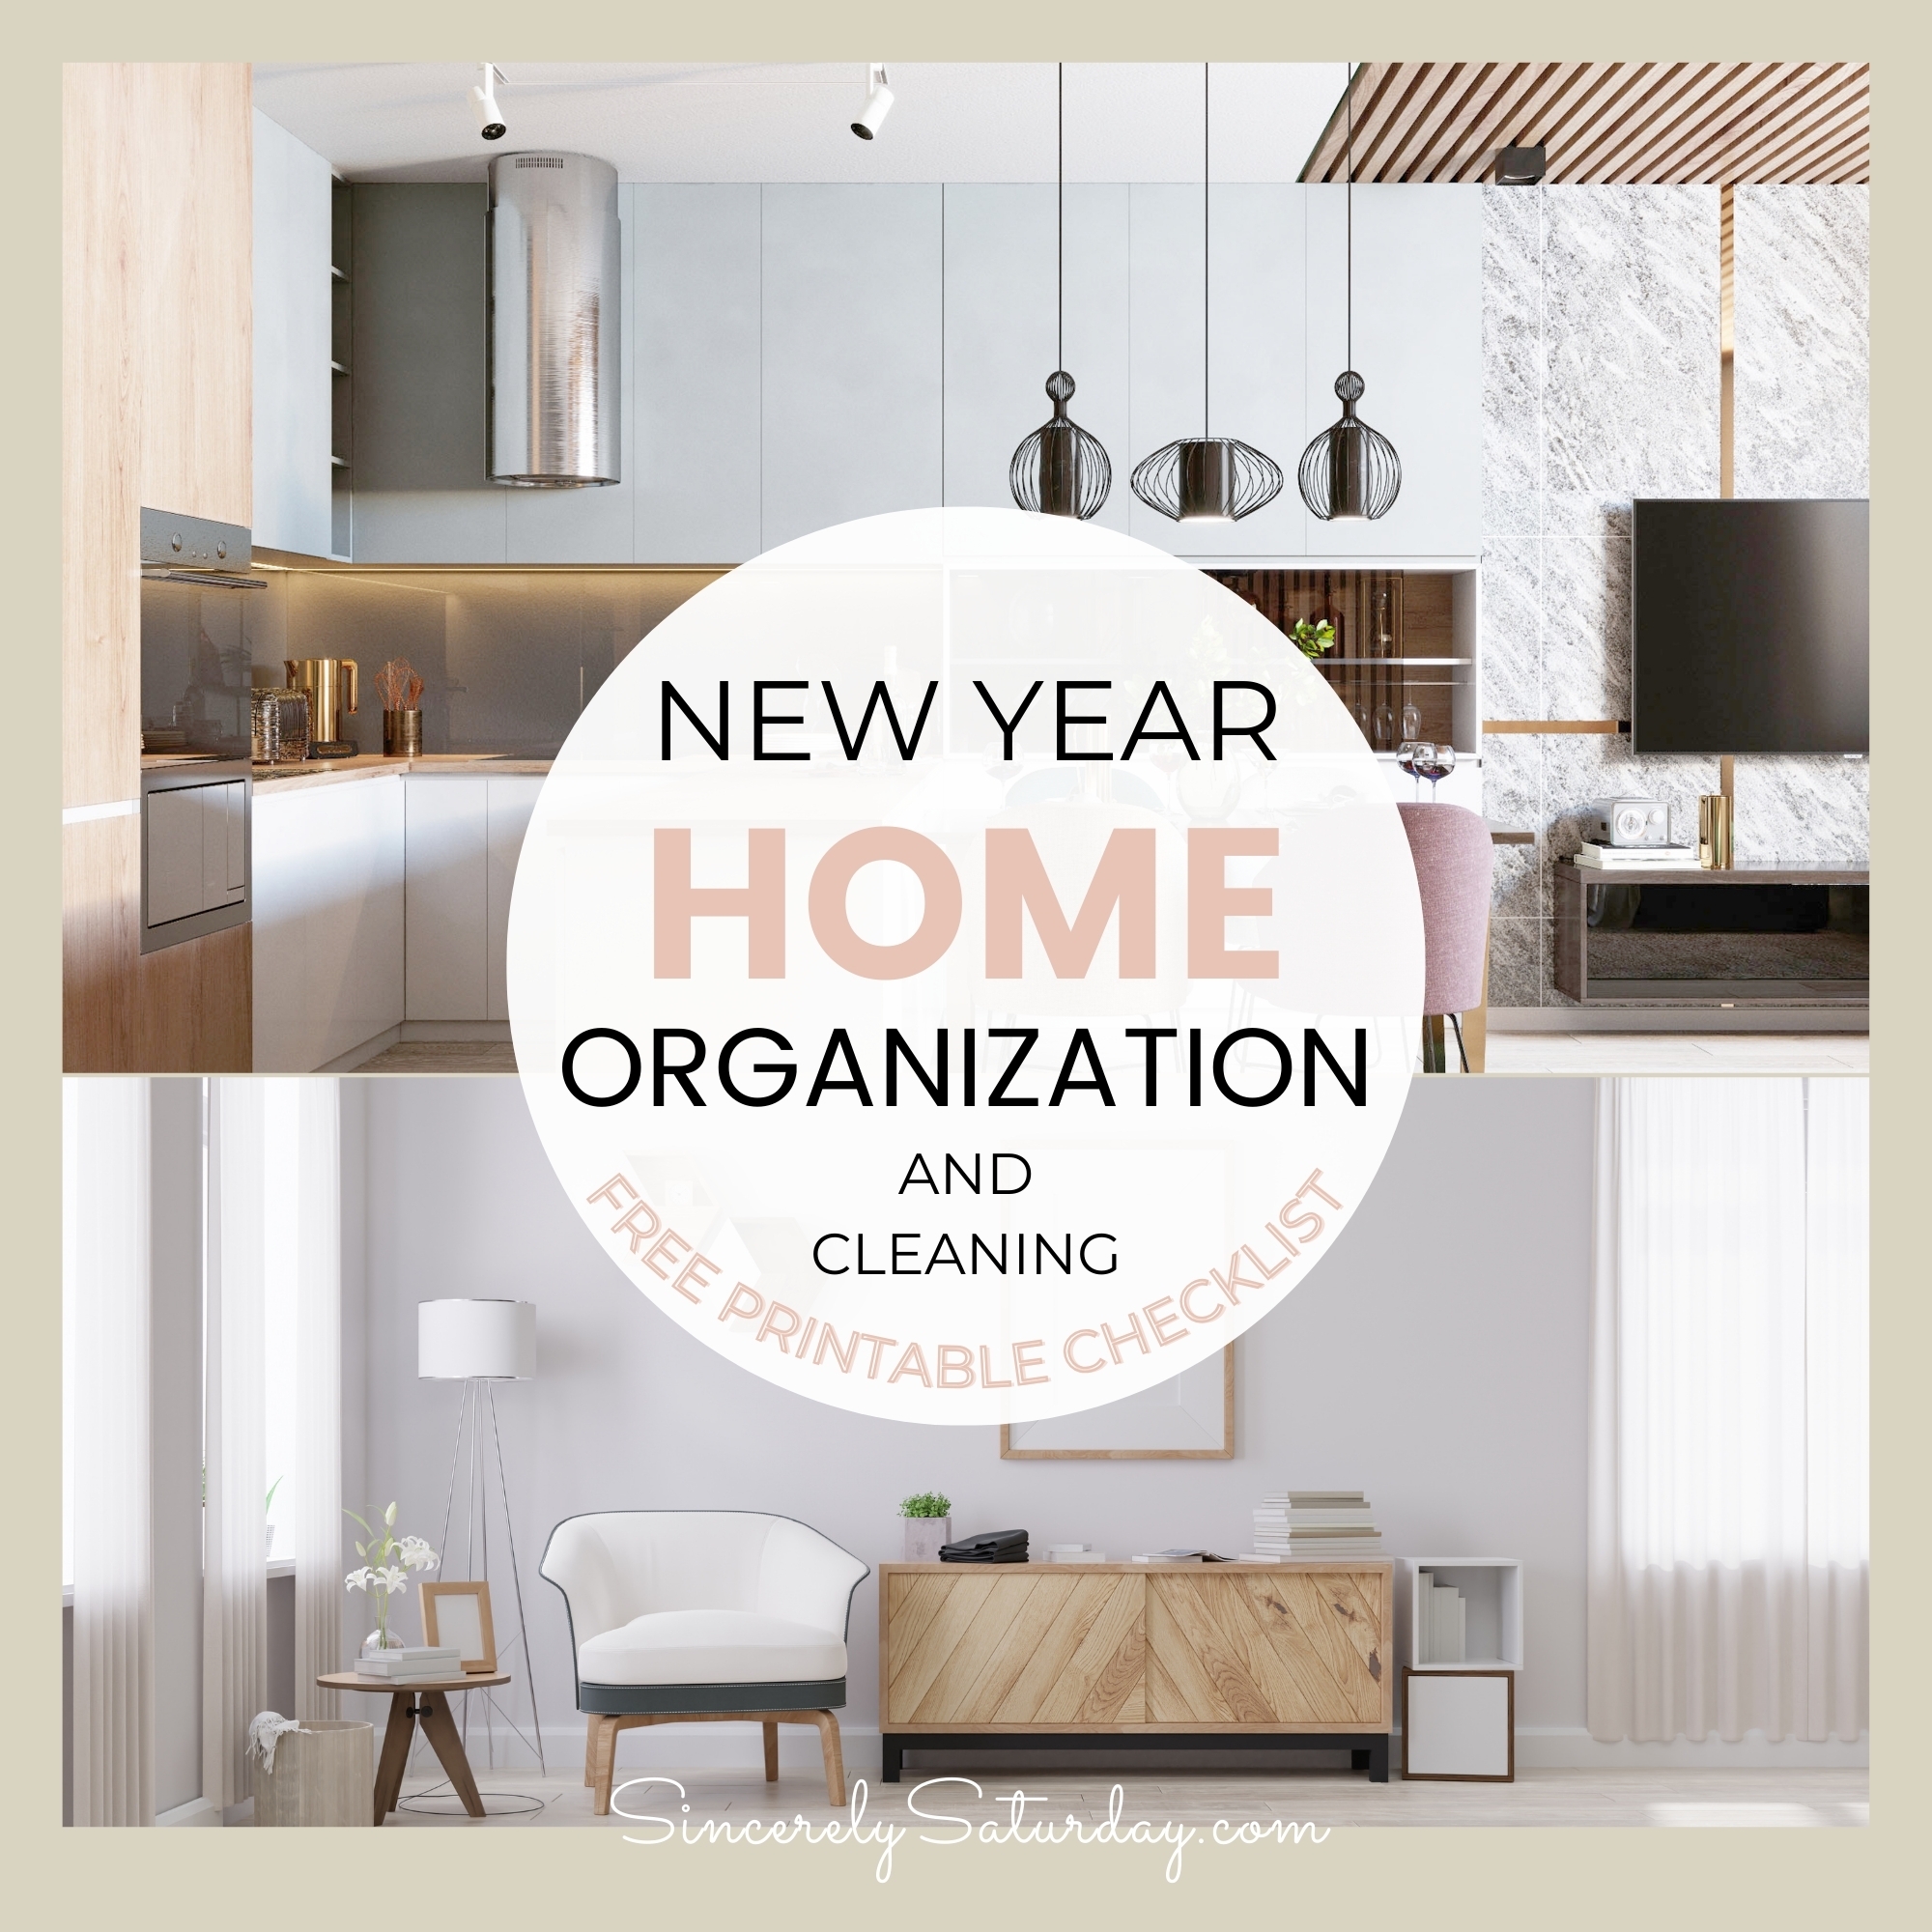 Start the New Year Right: A Guide to Home Organization + Free Printable!